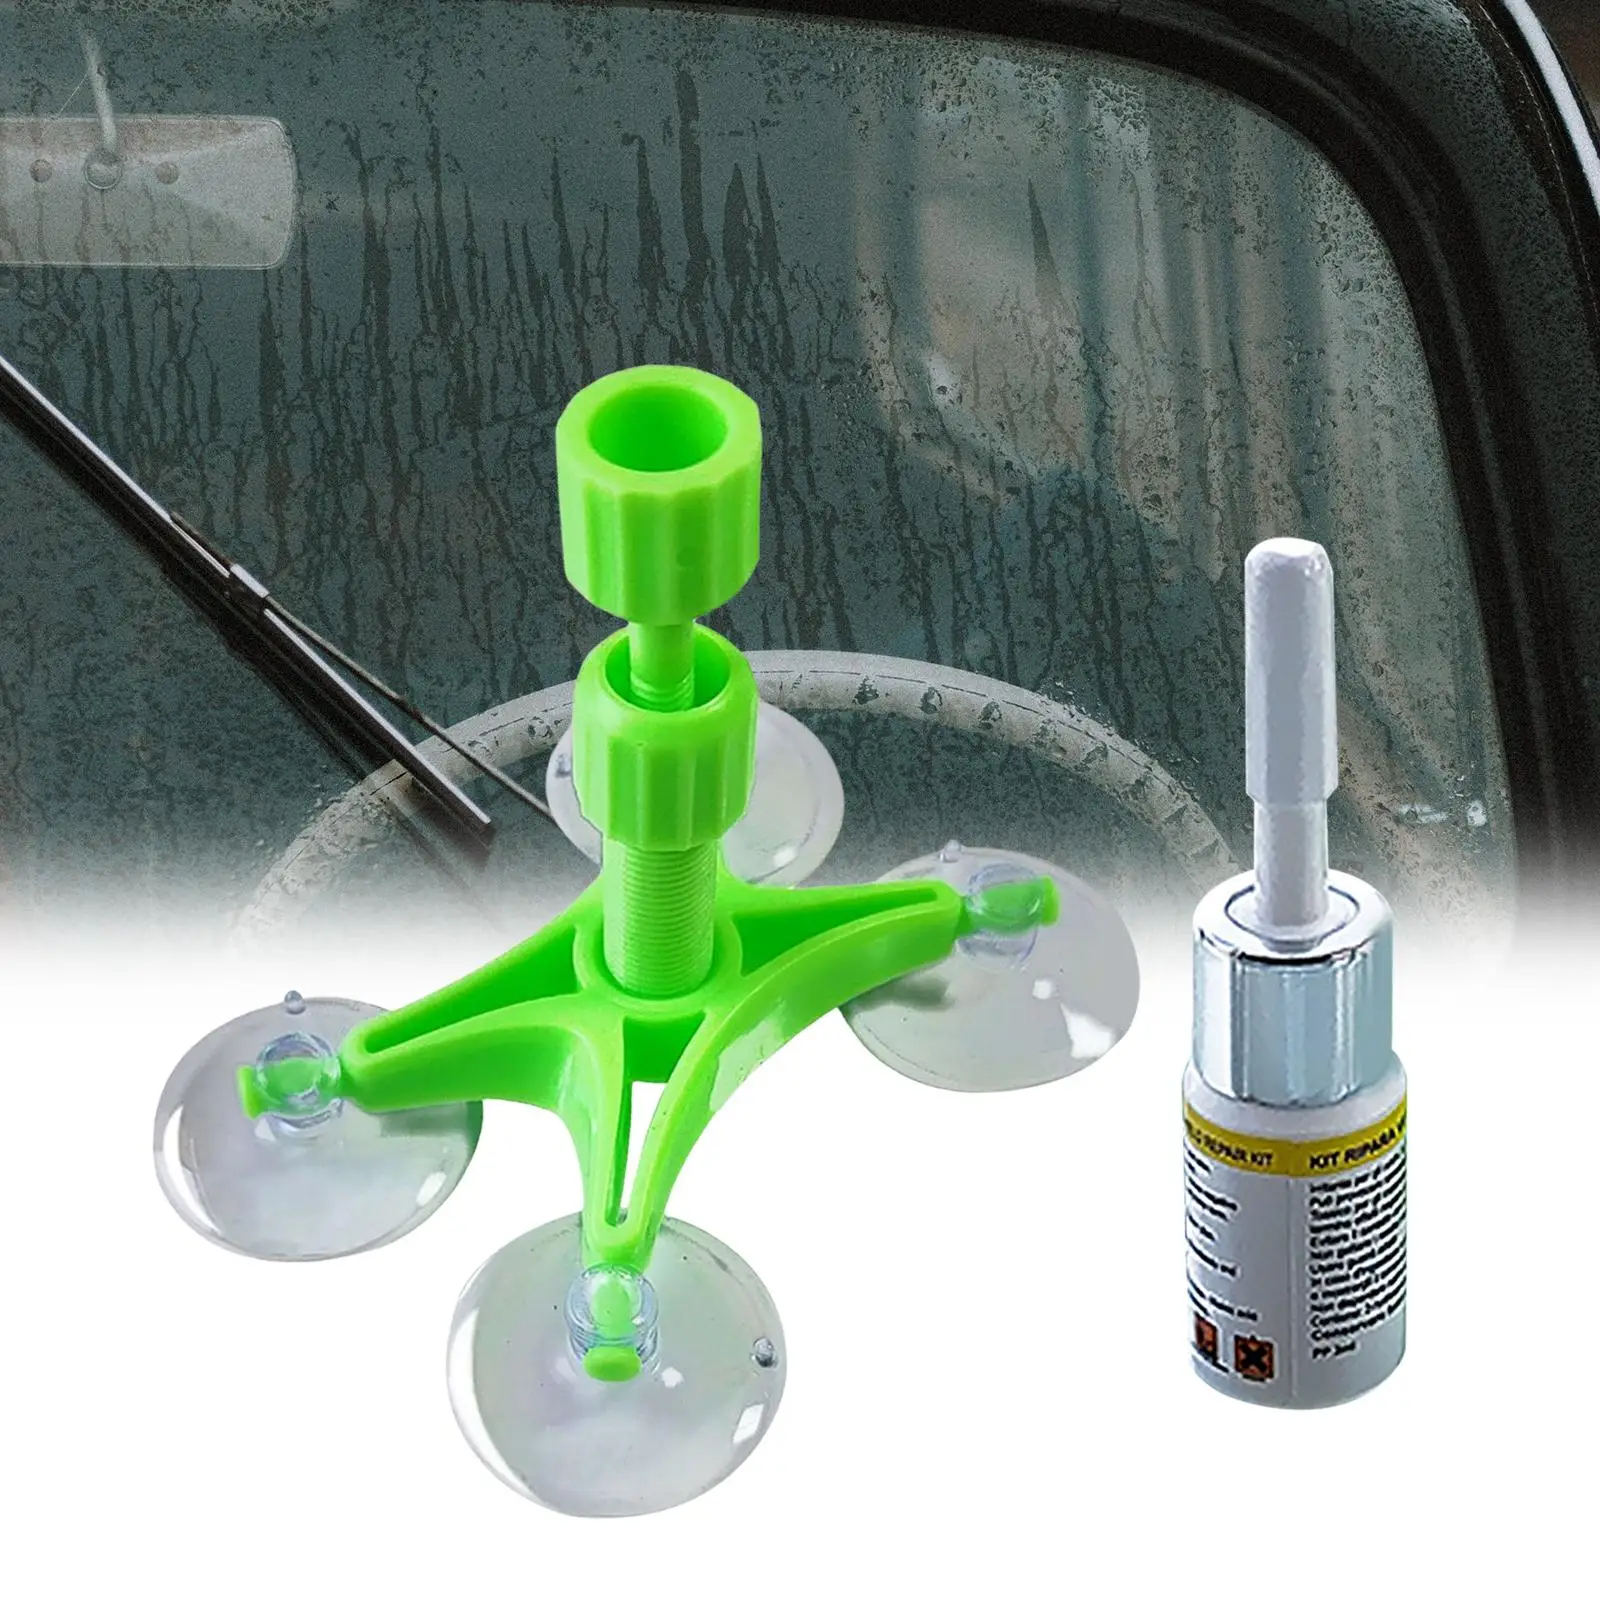 Automotive Windshield Crack Repairing Kit, for Small Damages Windscreen Chip Repair Tool